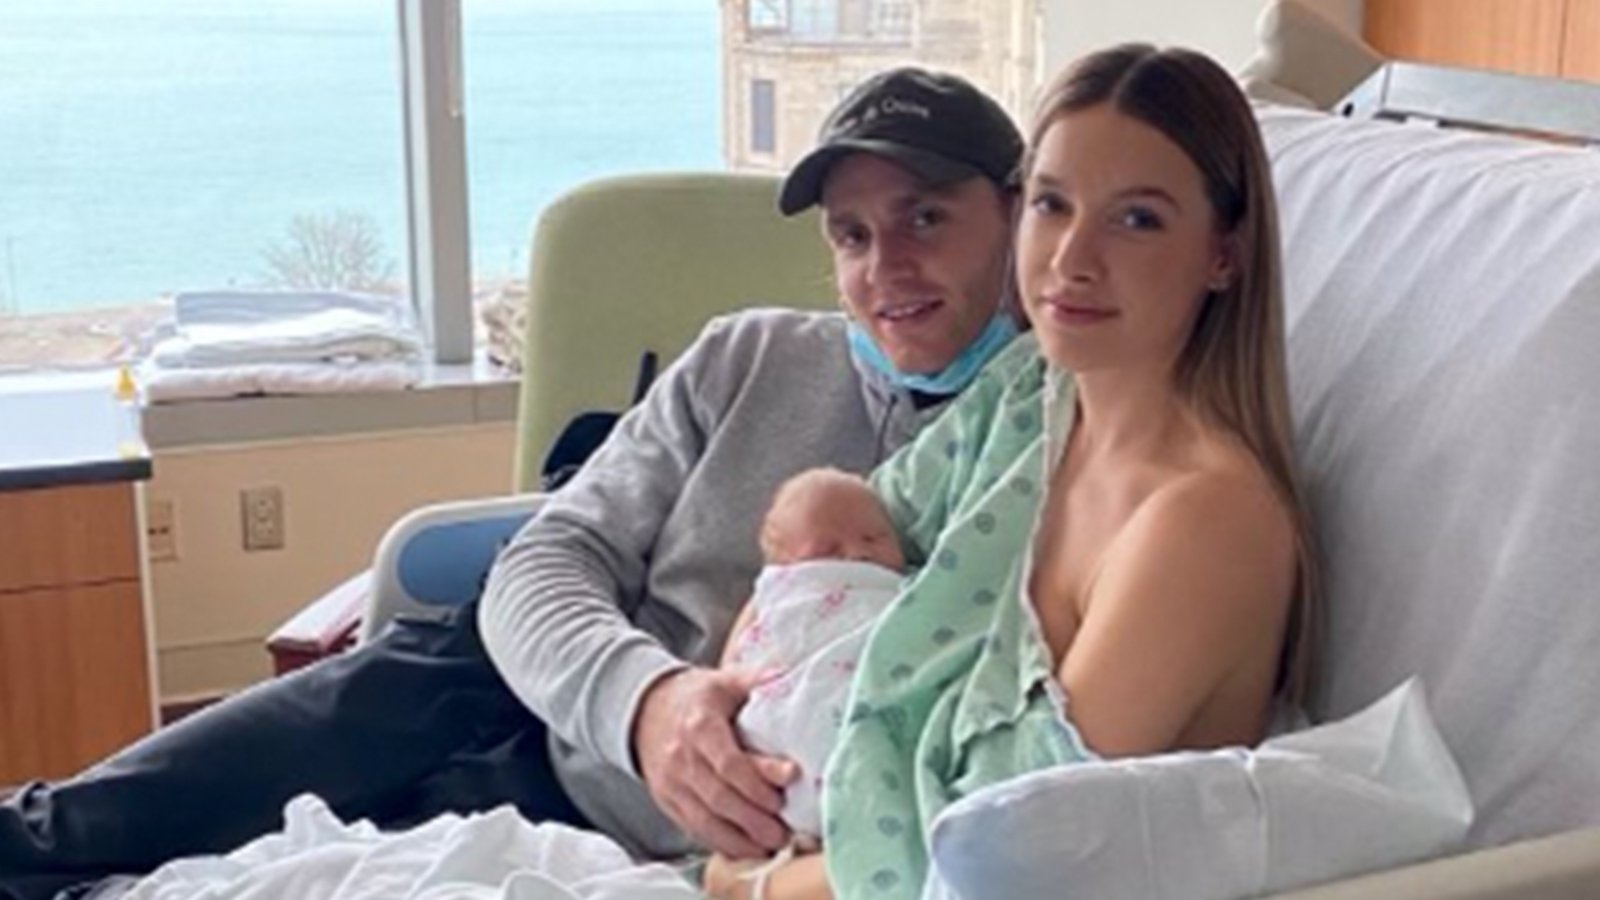 Patrick Kane surprises the world by announcing the birth of his son